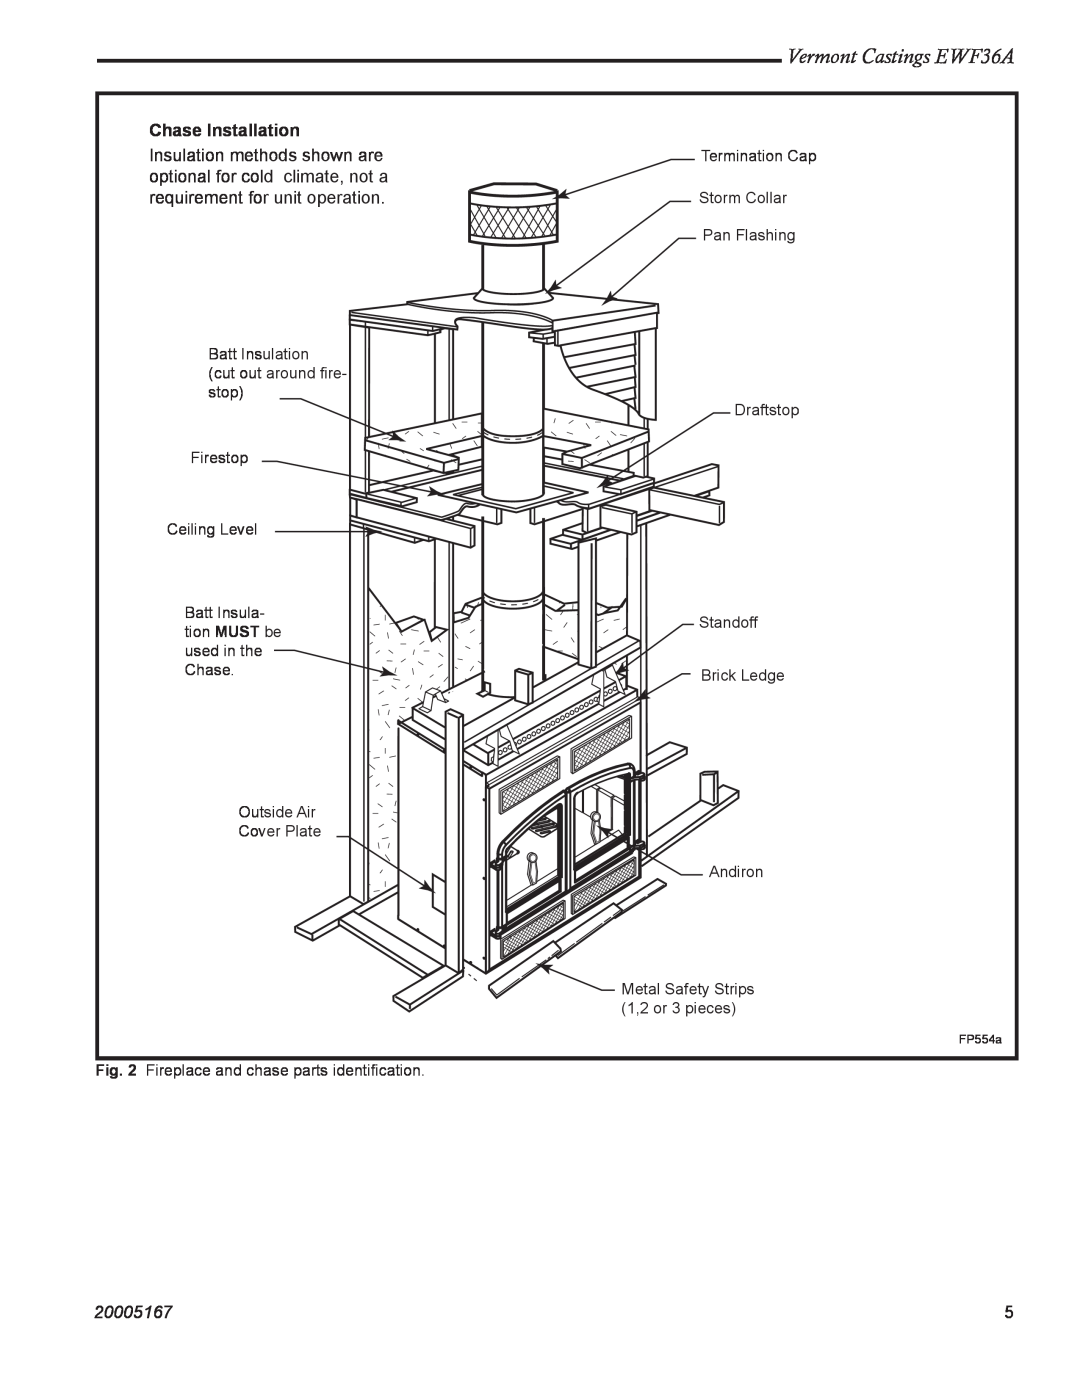 Vermont Casting installation instructions Vermont Castings EWF36A, Chase Installation, 20005167 